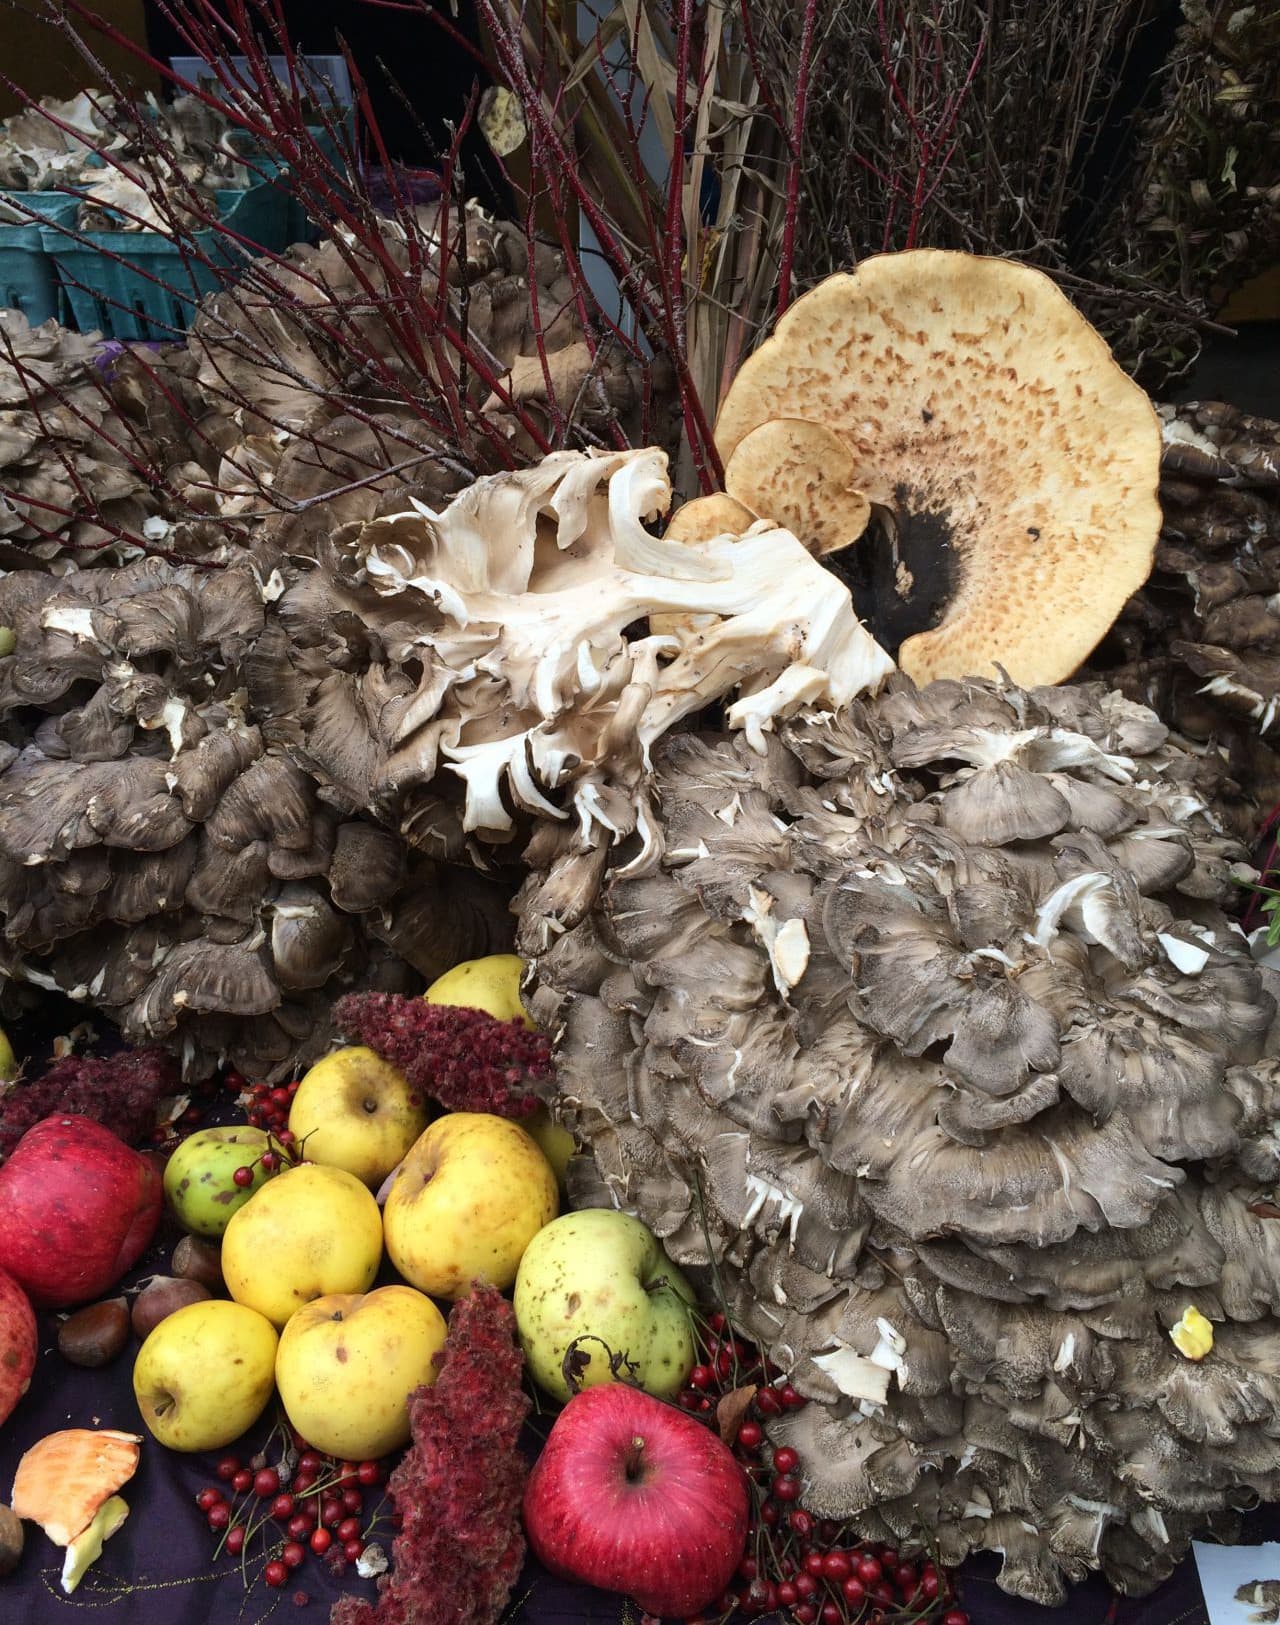 These are some of the wild mushrooms Kathy Gunst found at a market in Rome, Italy. (Kathy Gunst)